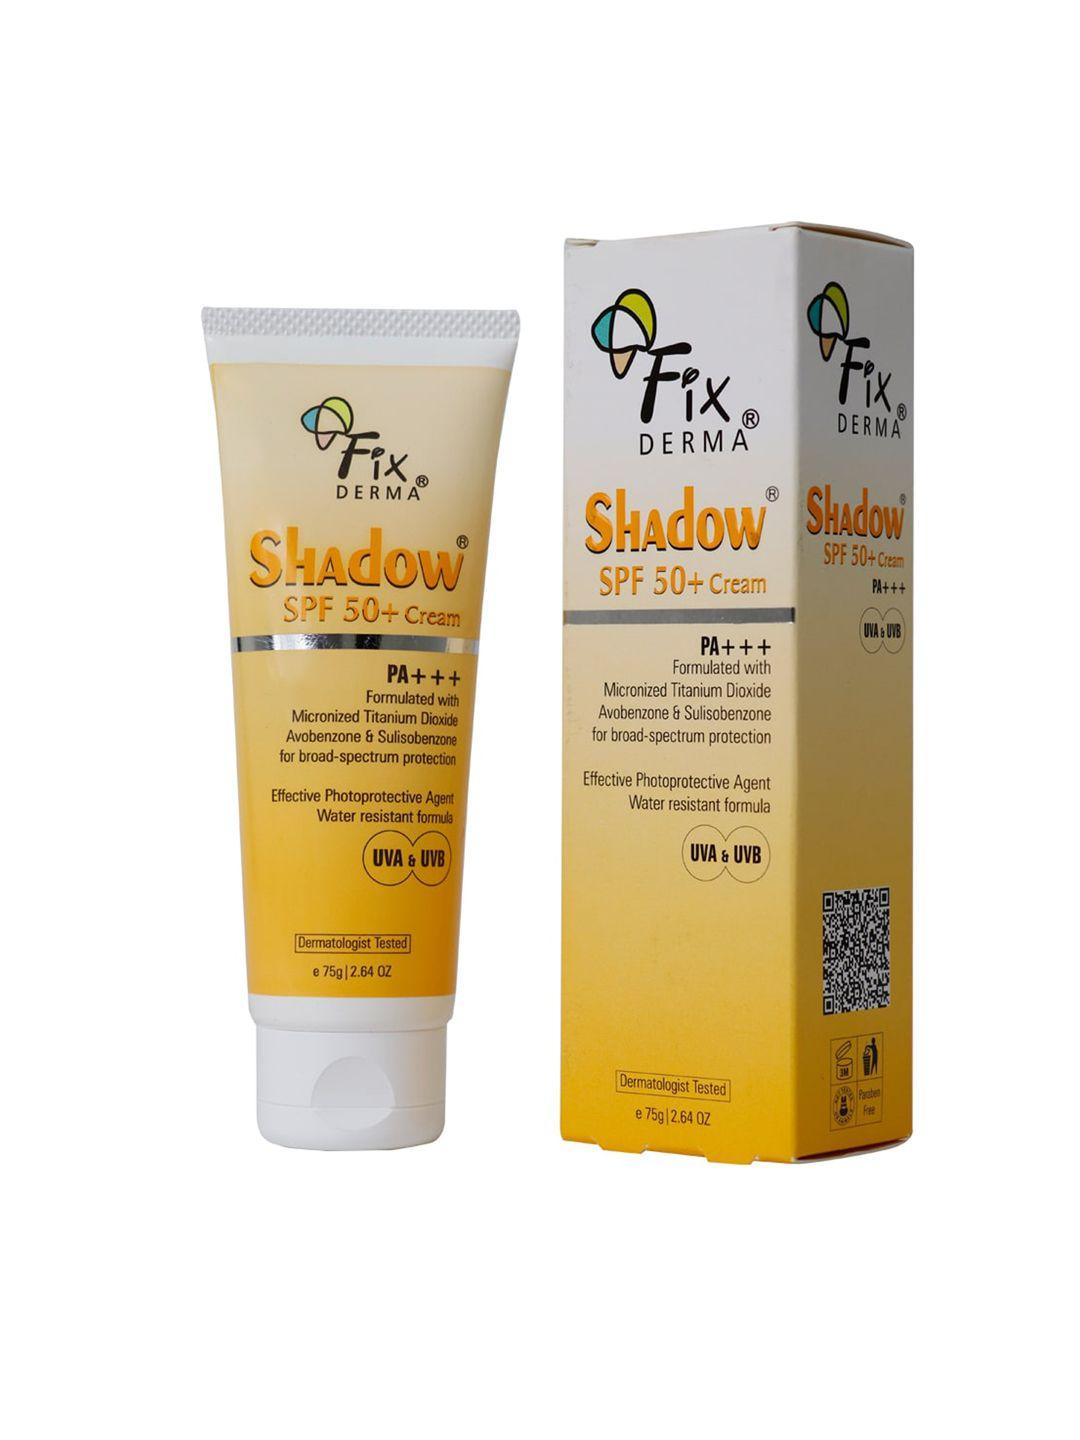 fixderma-shadow-sunscreen-spf-50+-cream-for-dry-skin-with-pa+++-protection---75g